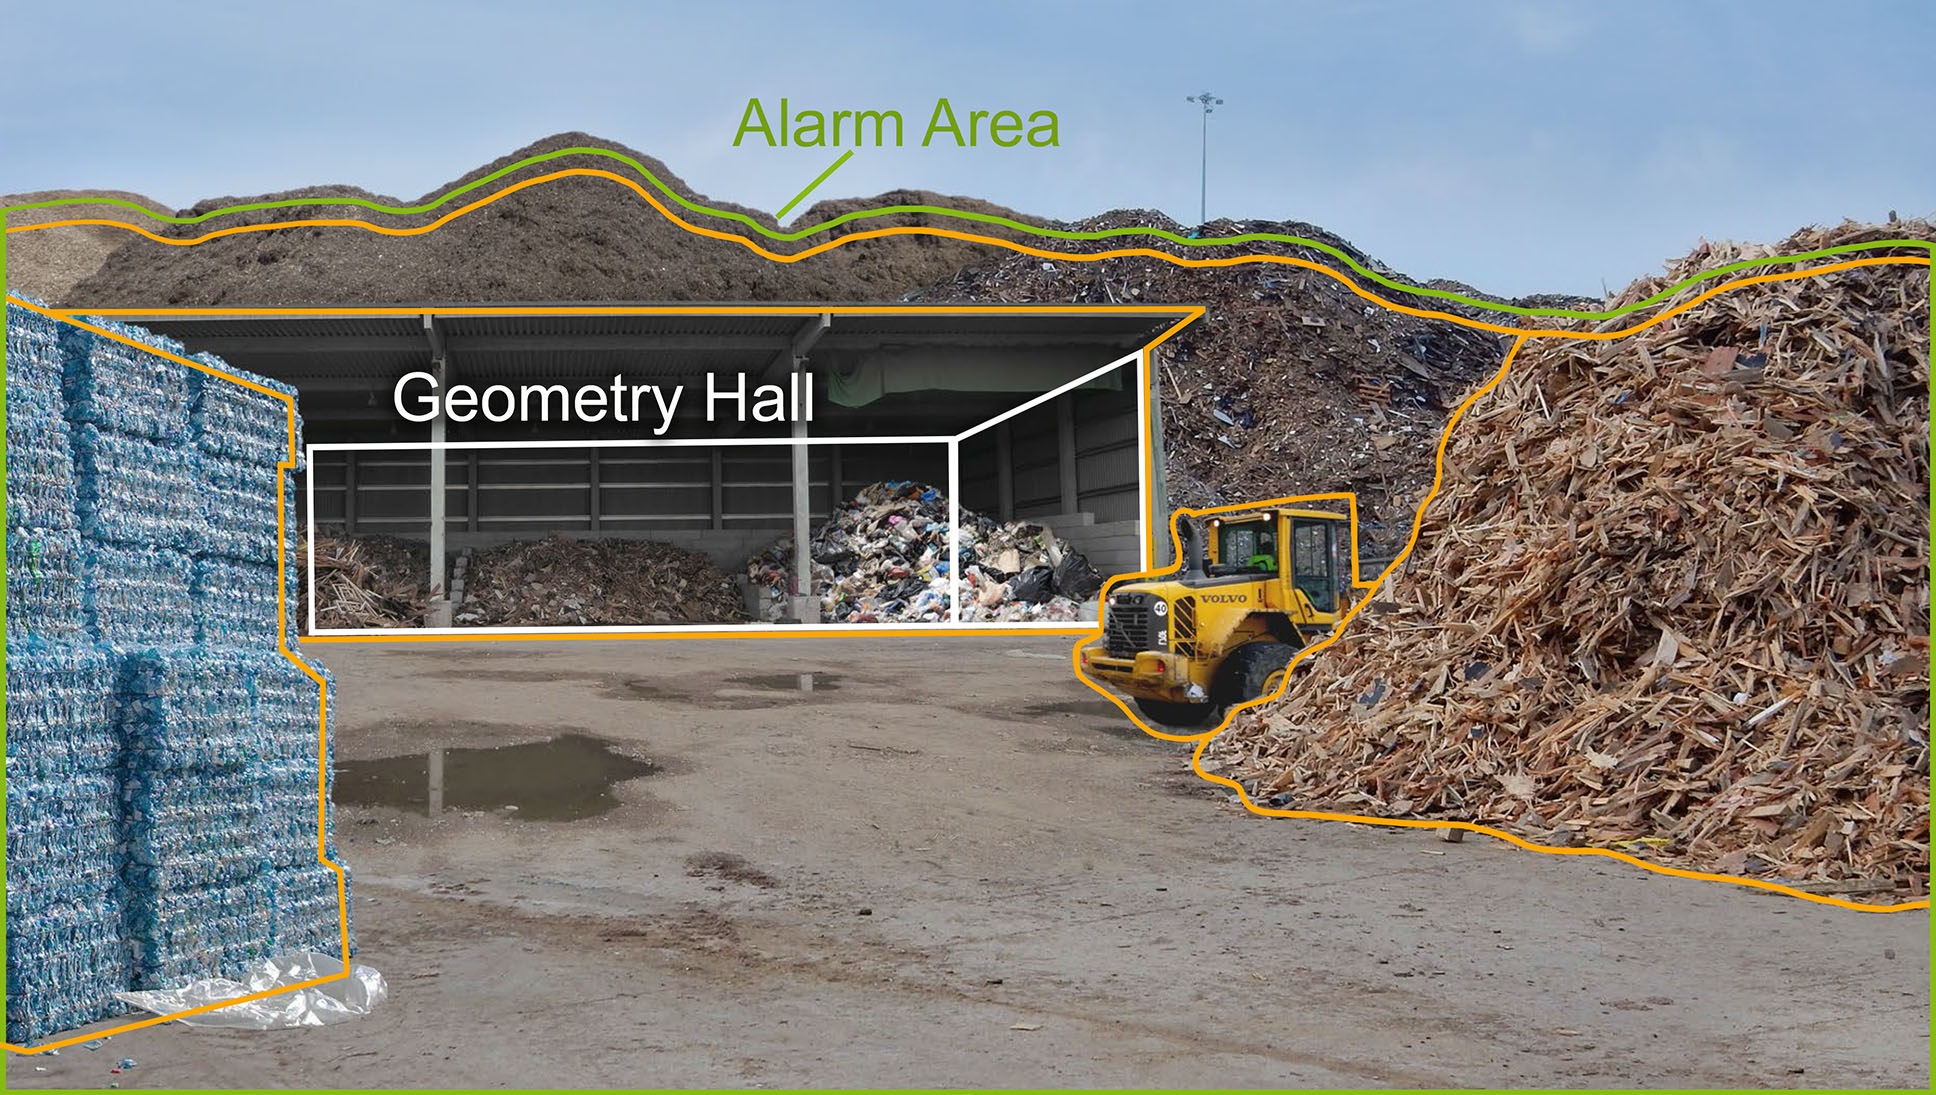 PYROsmart® understands the spatial geometry of the monitored area